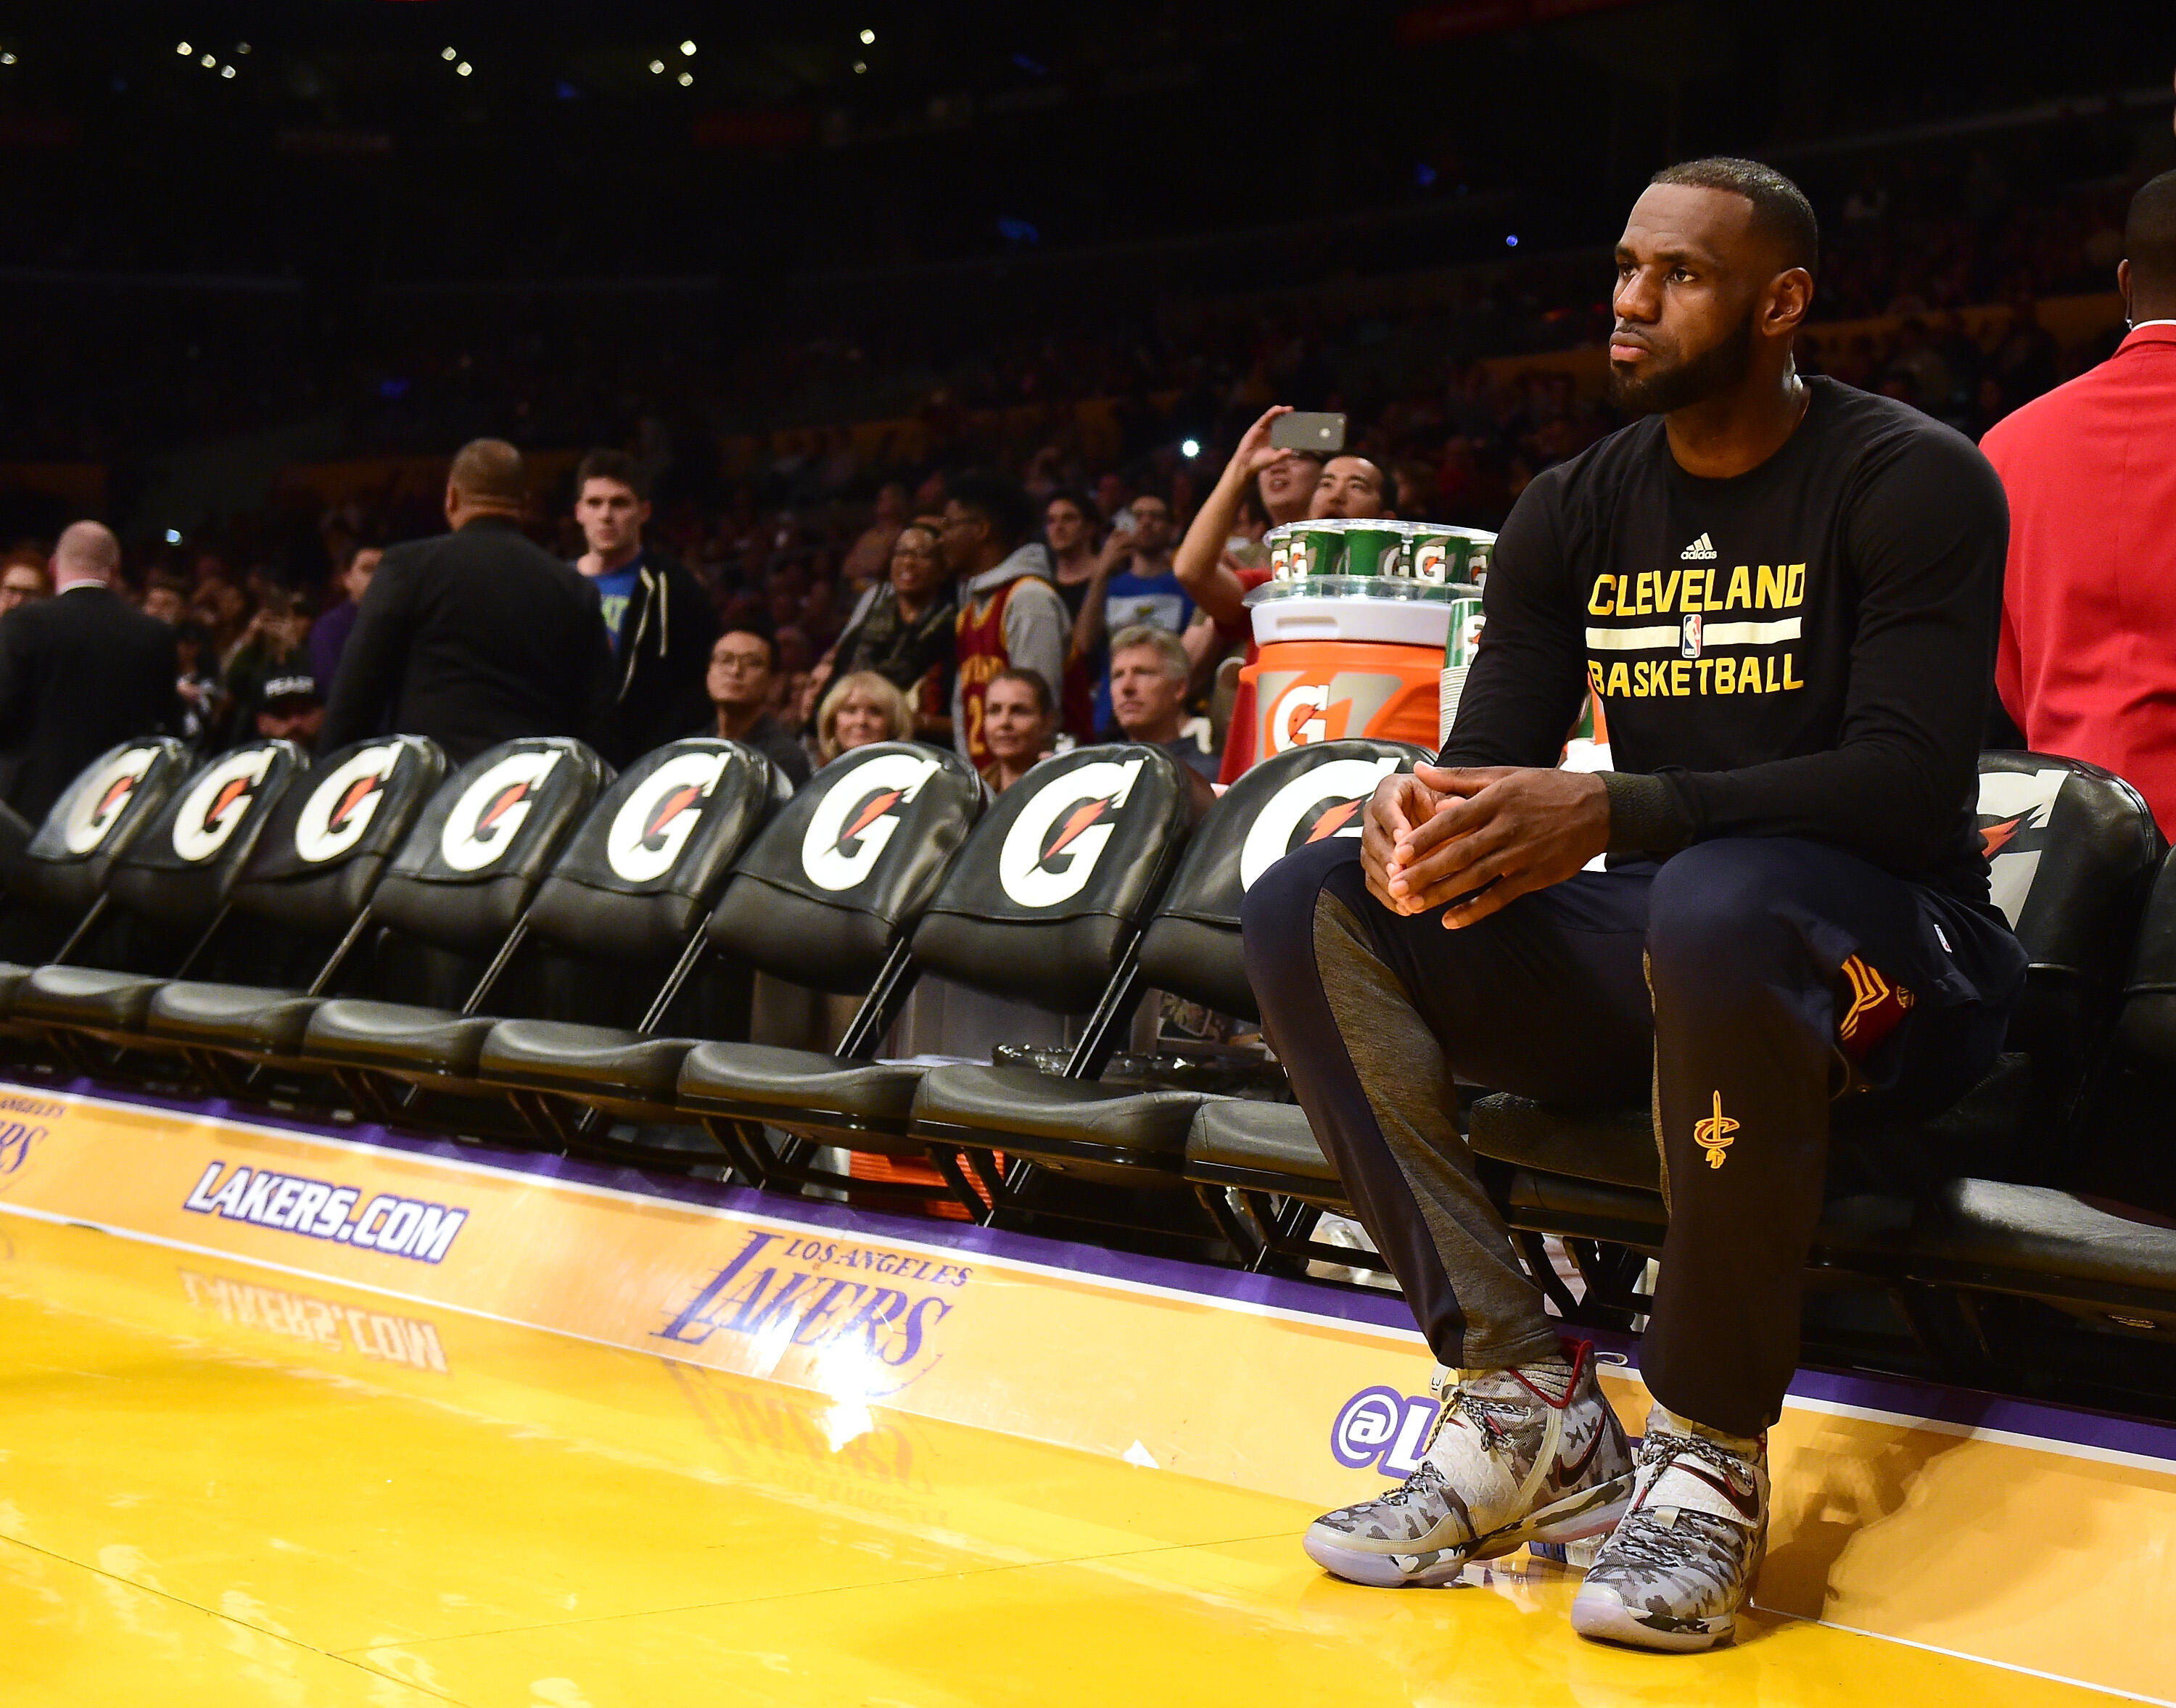 LOS ANGELES, CA - MARCH 19:  LeBron James #23 of the Cleveland Cavaliers waits for the start of the game against the Los Angeles Lakers at Staples Center on March 19, 2017 in Los Angeles, California.  NOTE TO USER: User expressly acknowledges and agrees t